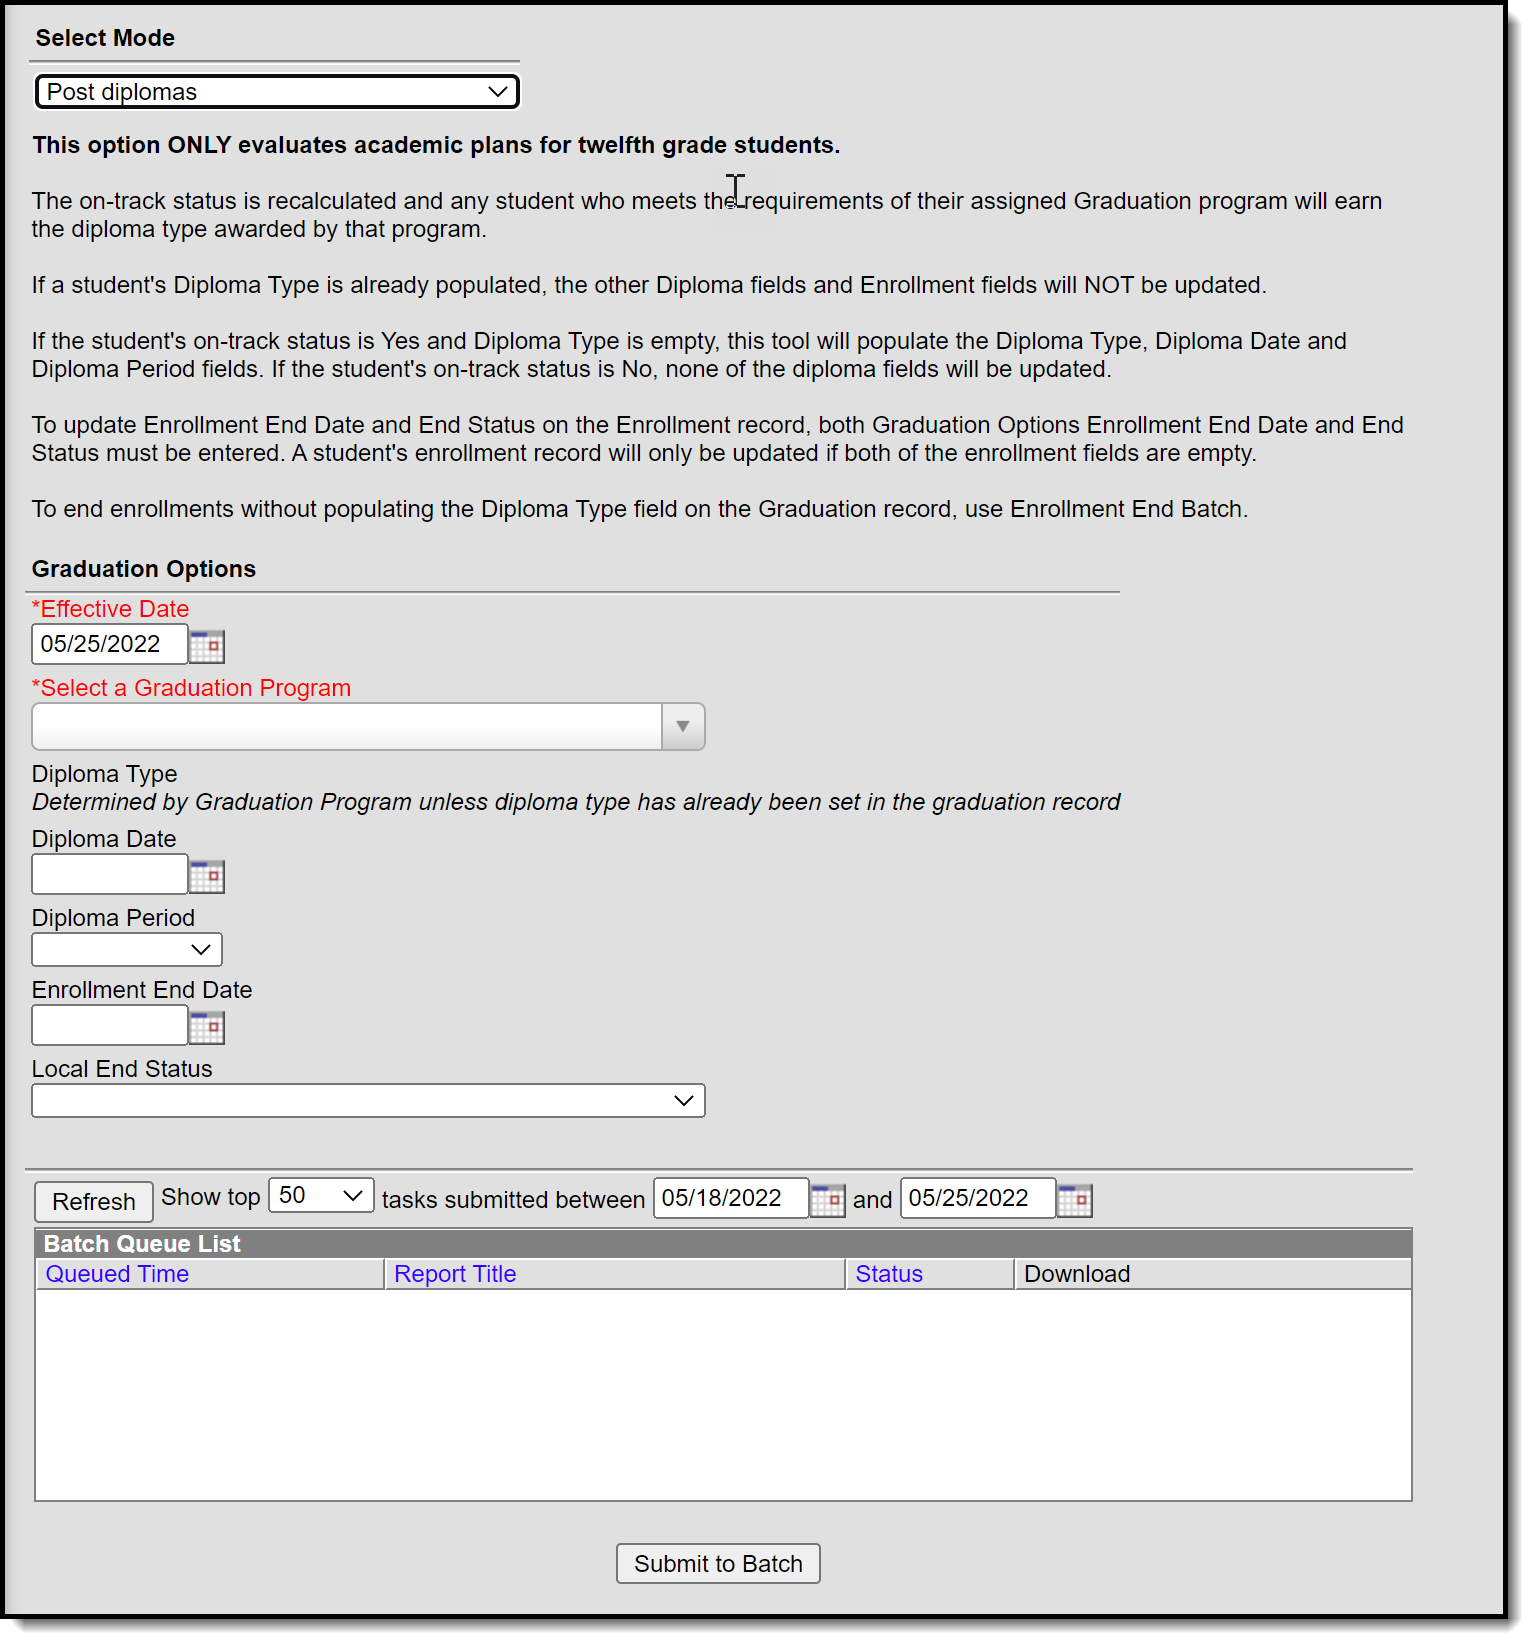 Screenshot of the tool with a mode of Post diplomas selected. 